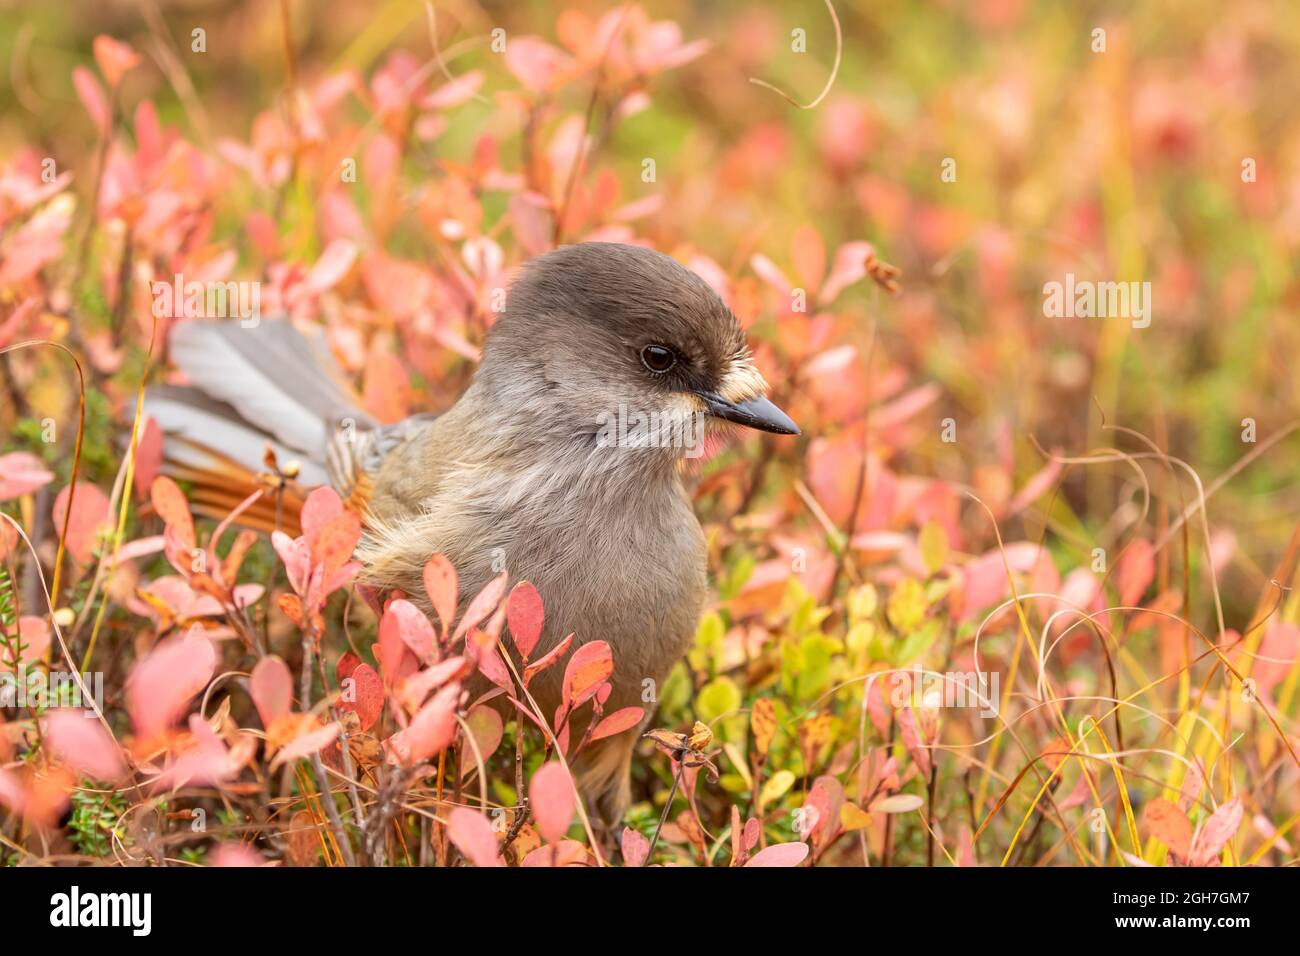 Adorable corvne Siberian jay, Perisoreus infaustus, among autumn colored blueberry leaves in Finnish nature Stock Photo